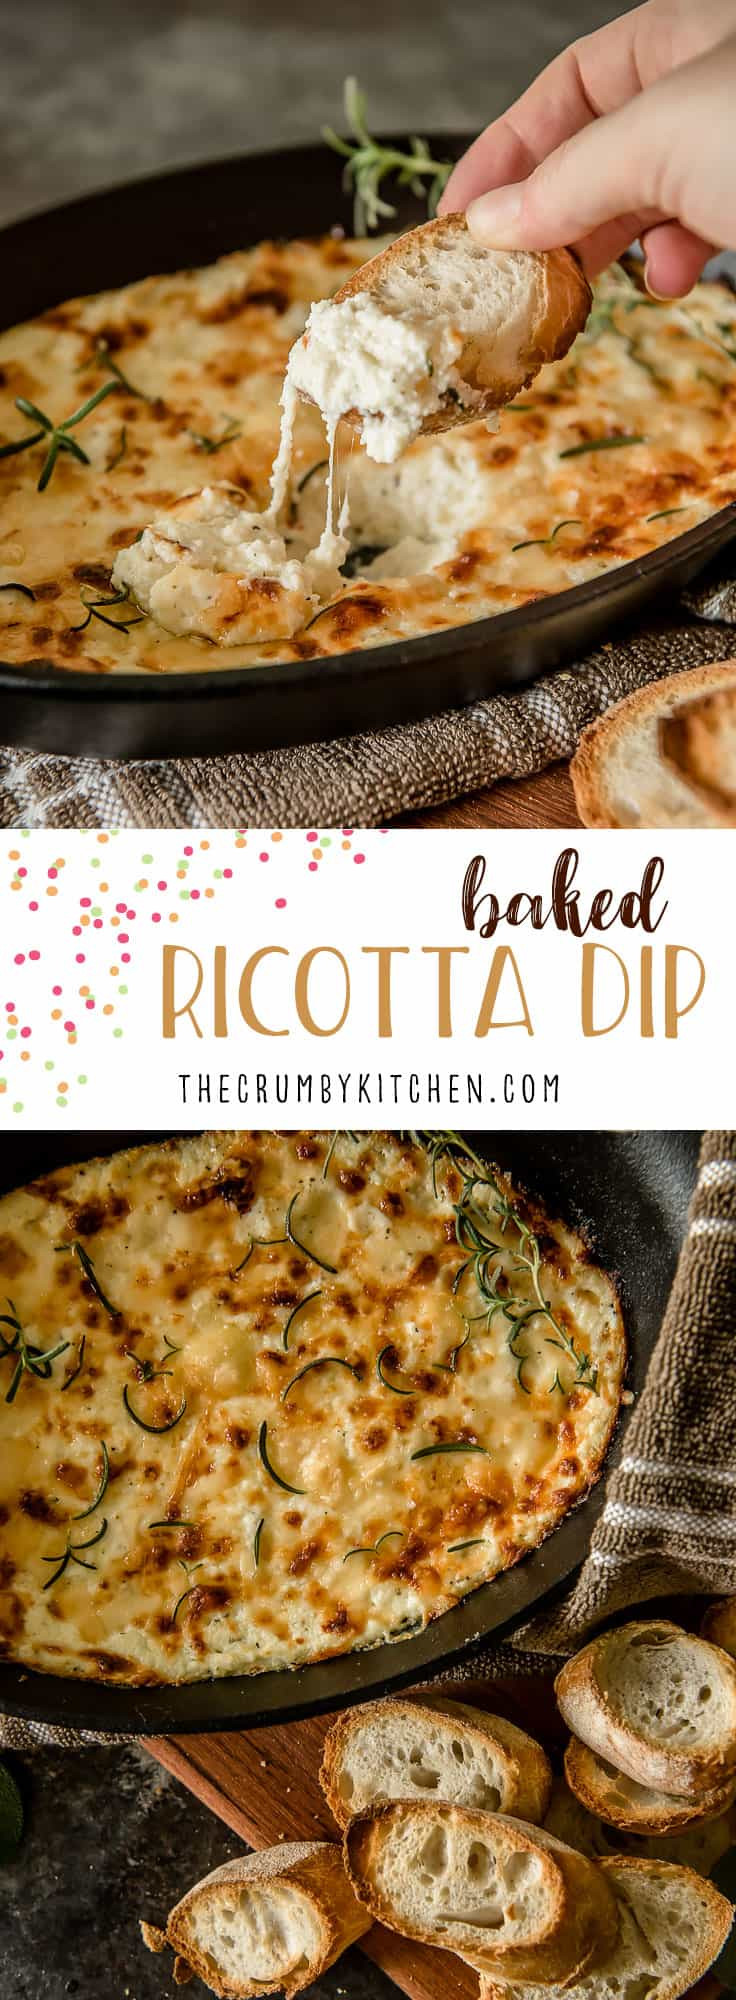 Ricotta Cheese Appetizers
 Baked Ricotta Dip and Capturing the Bite The Crumby Kitchen